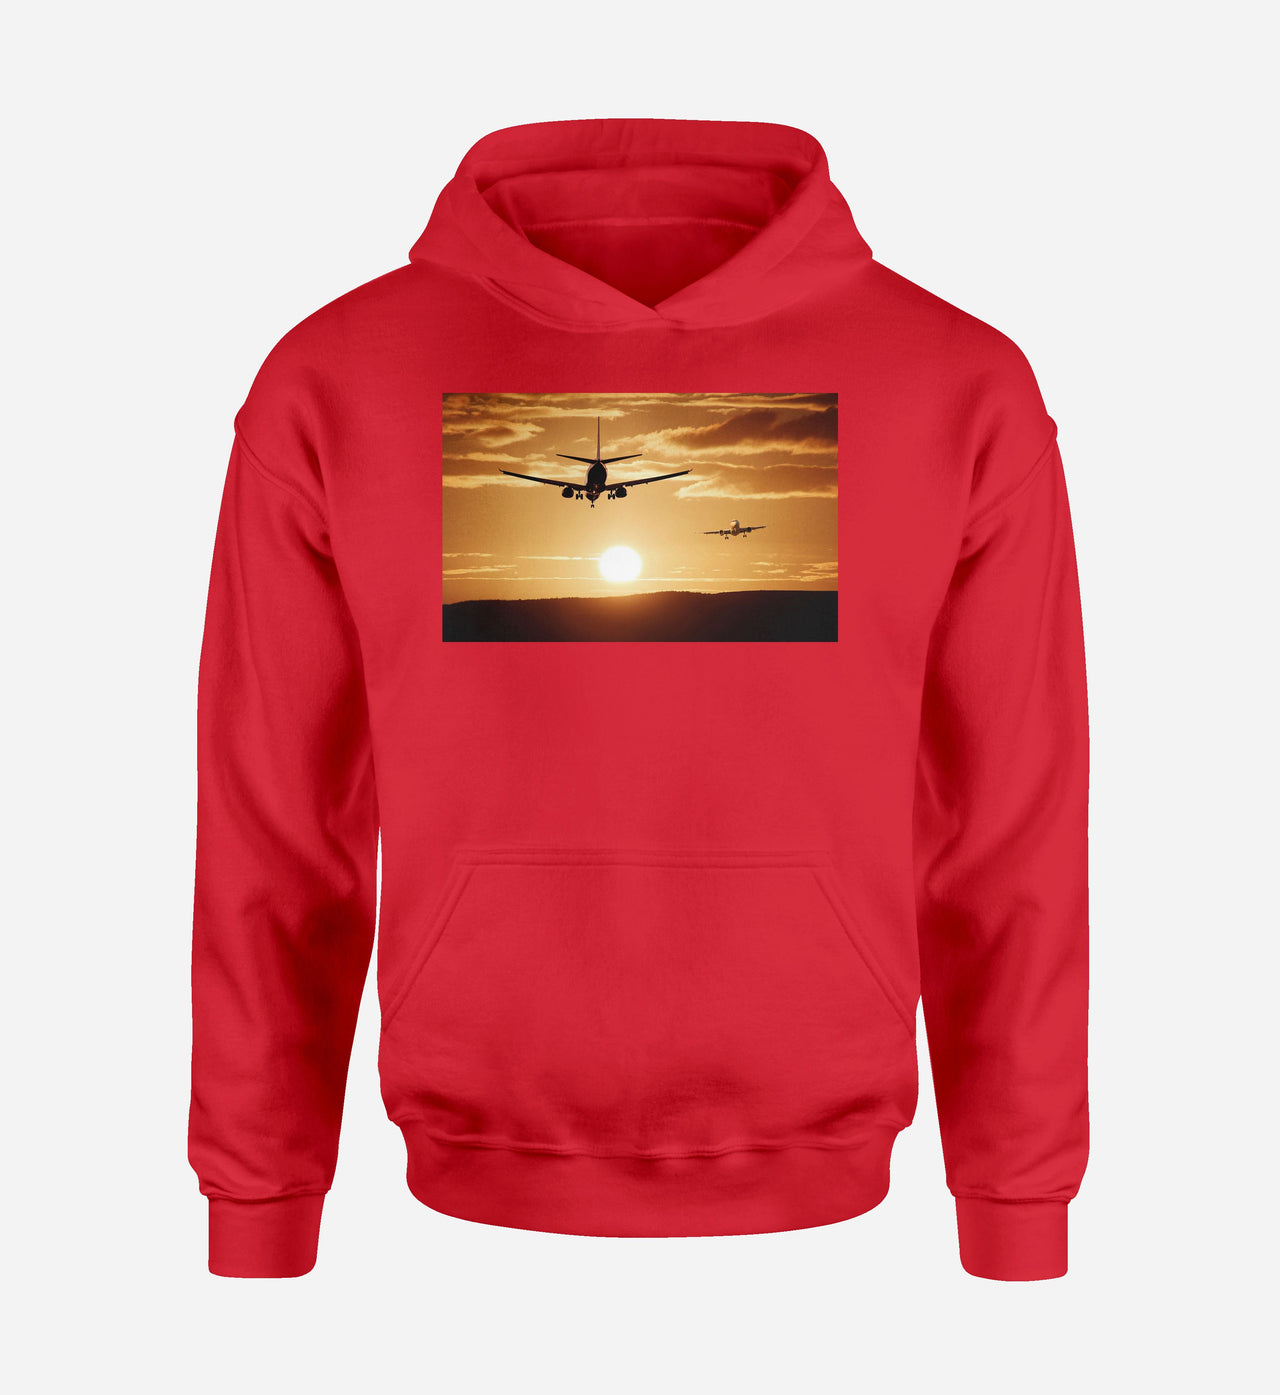 Two Aeroplanes During Sunset Designed Hoodies